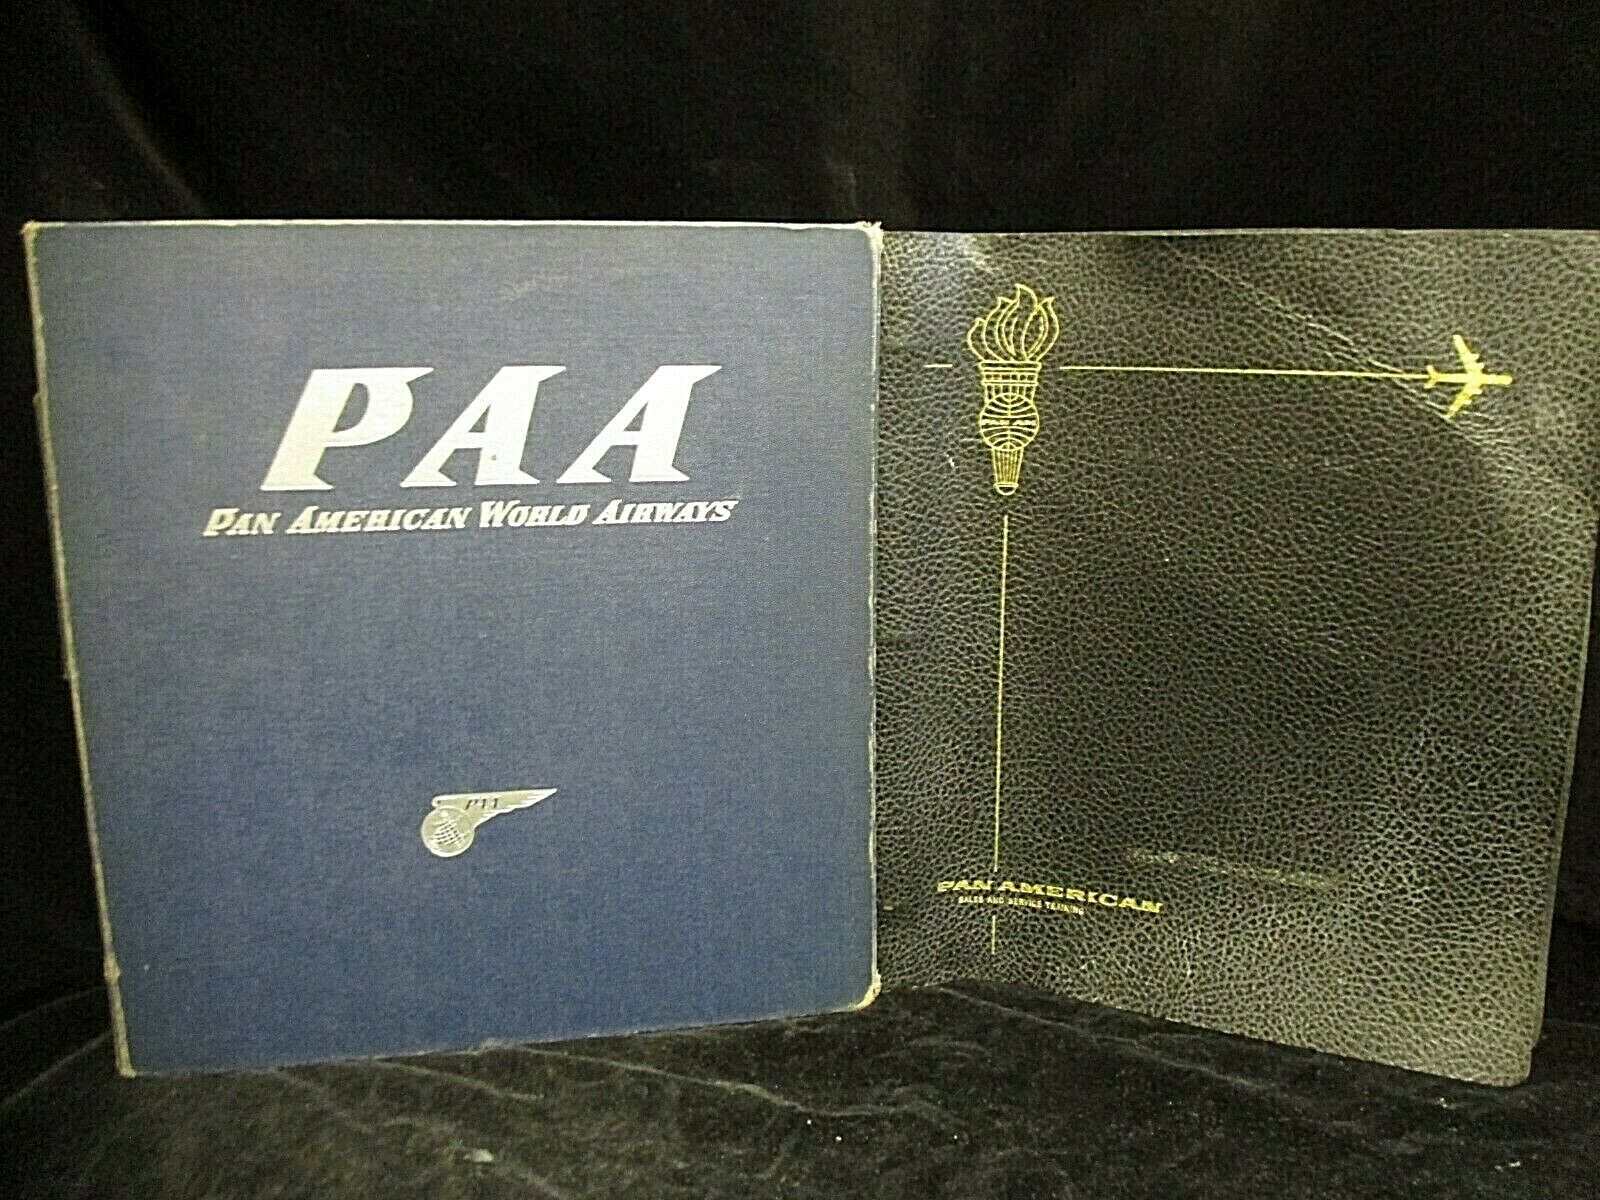 2 Pan Am Airlines Binders, Different Styles, Blue w/ Silver Logo, Used, Empty